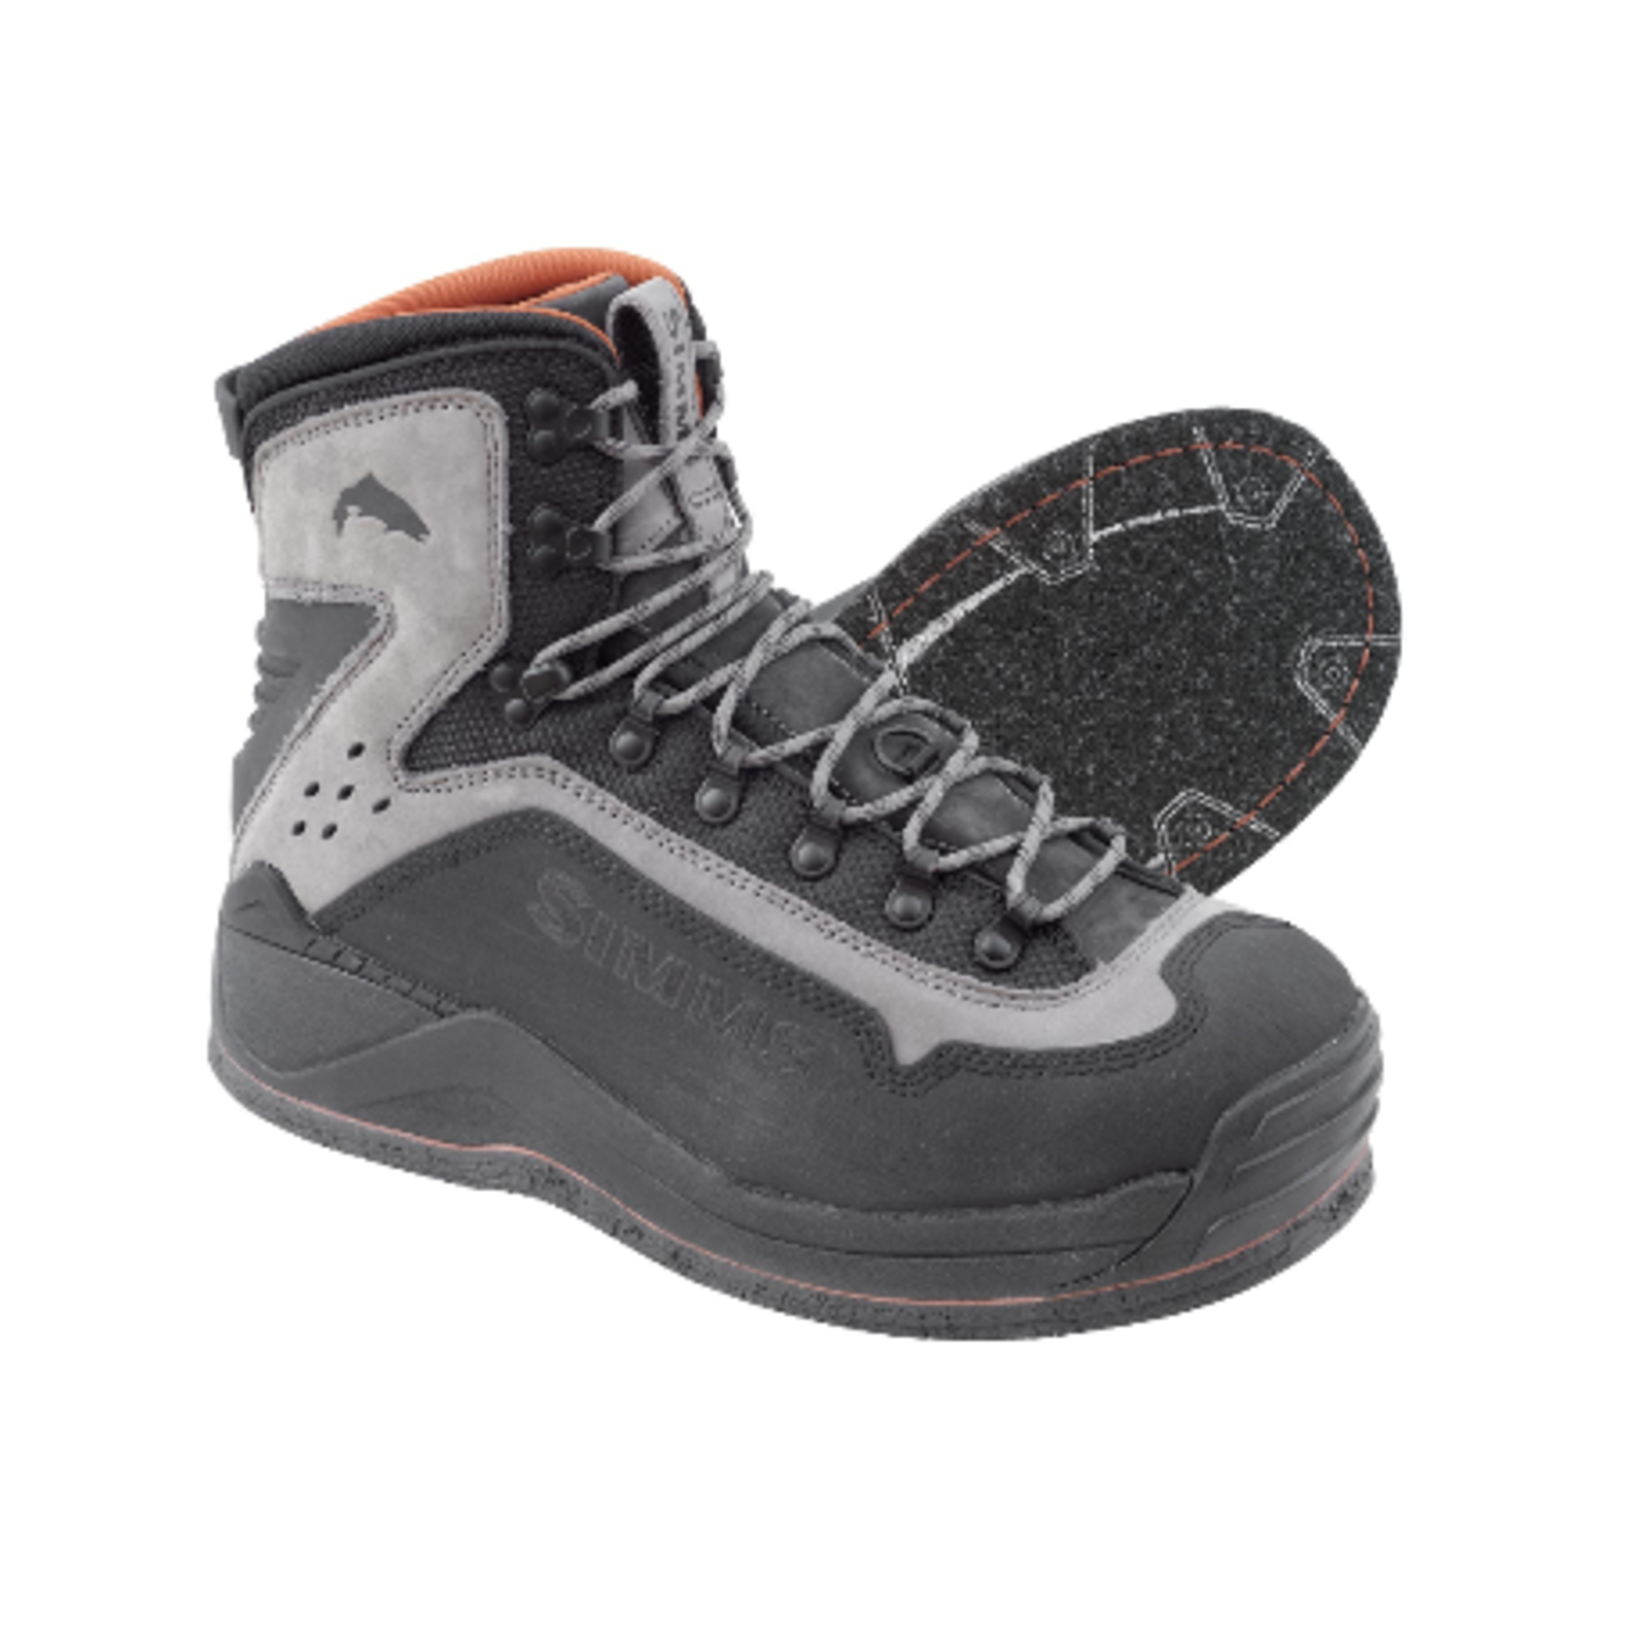 Simms G3 Guide Wading Boots - Felt Soles